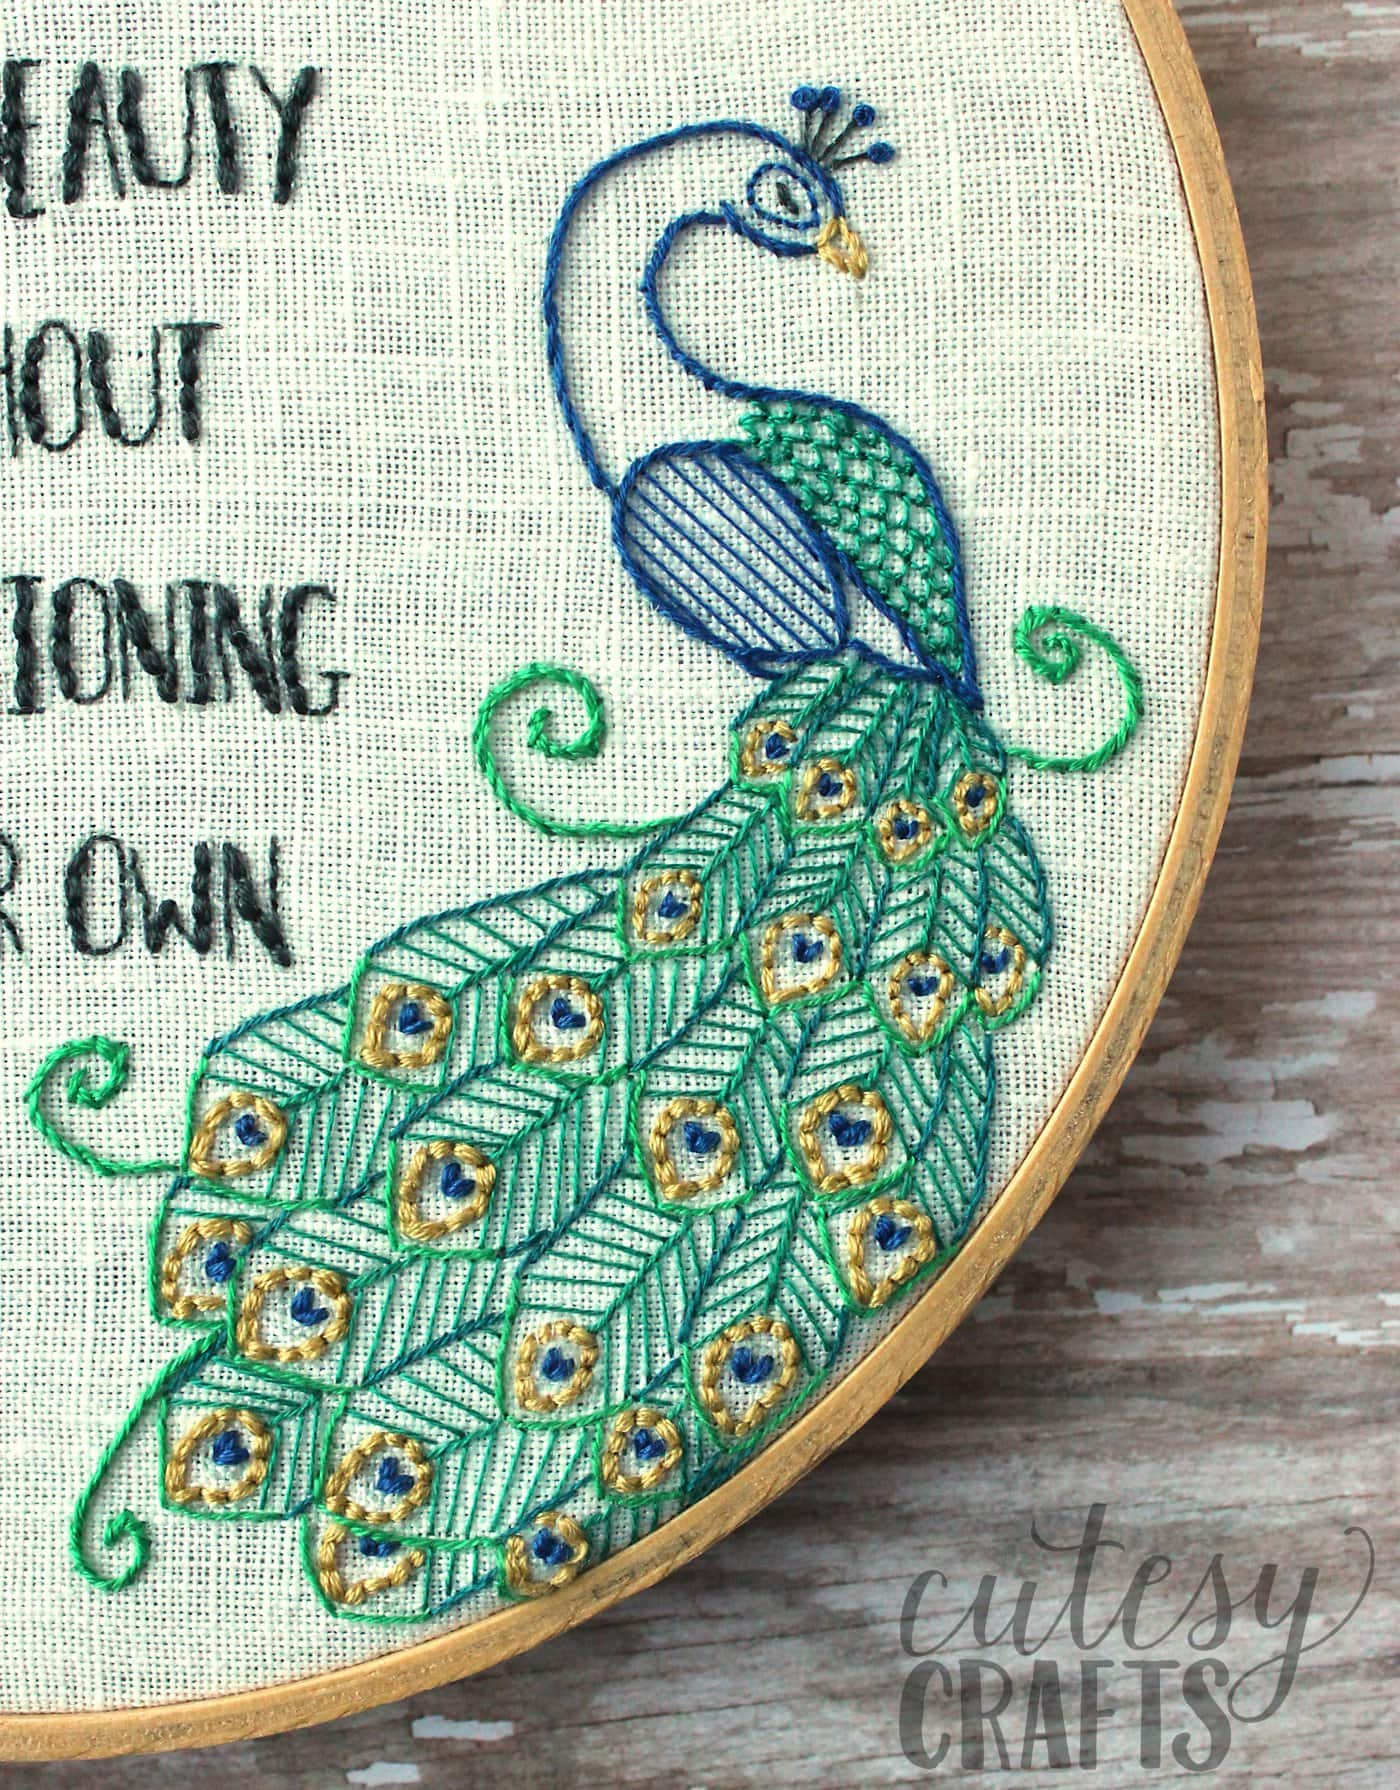 Peacock Embroidery Pattern Flamingo And Peacock Free Embroidery Pattern The Polka Dot Chair